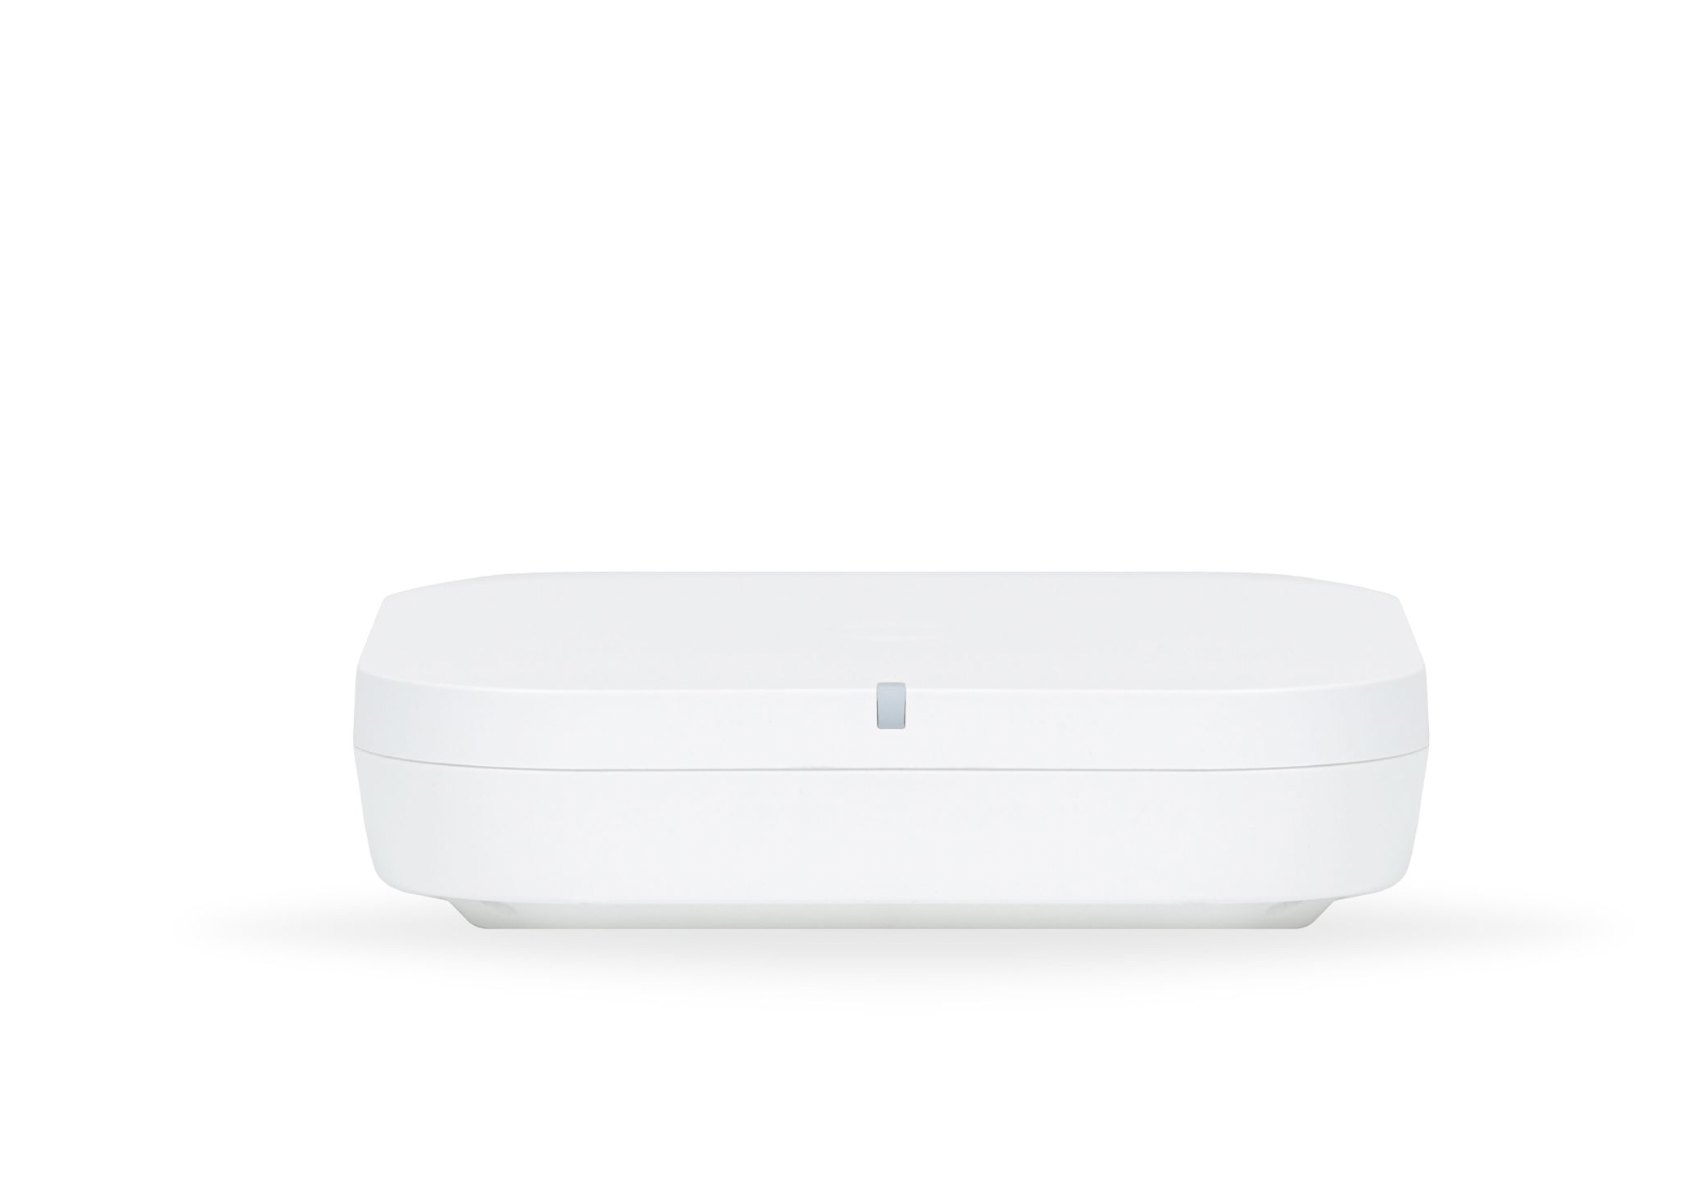 PoEWit Releases Wi-Fi 6 Access Point Powered by PoE+